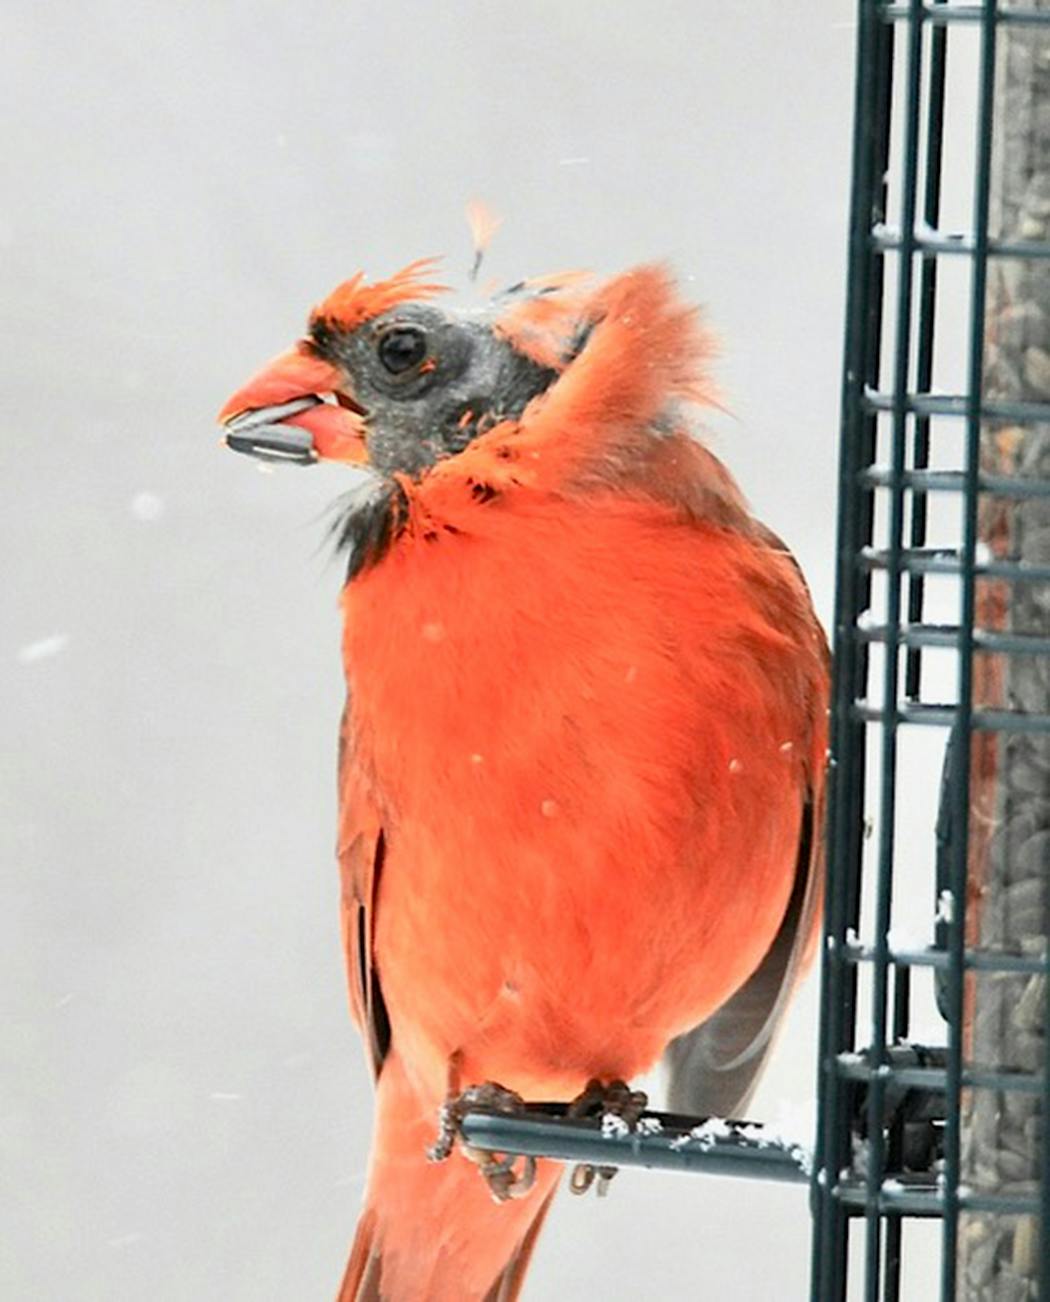 Bald cardinals will regrow their head feathers.